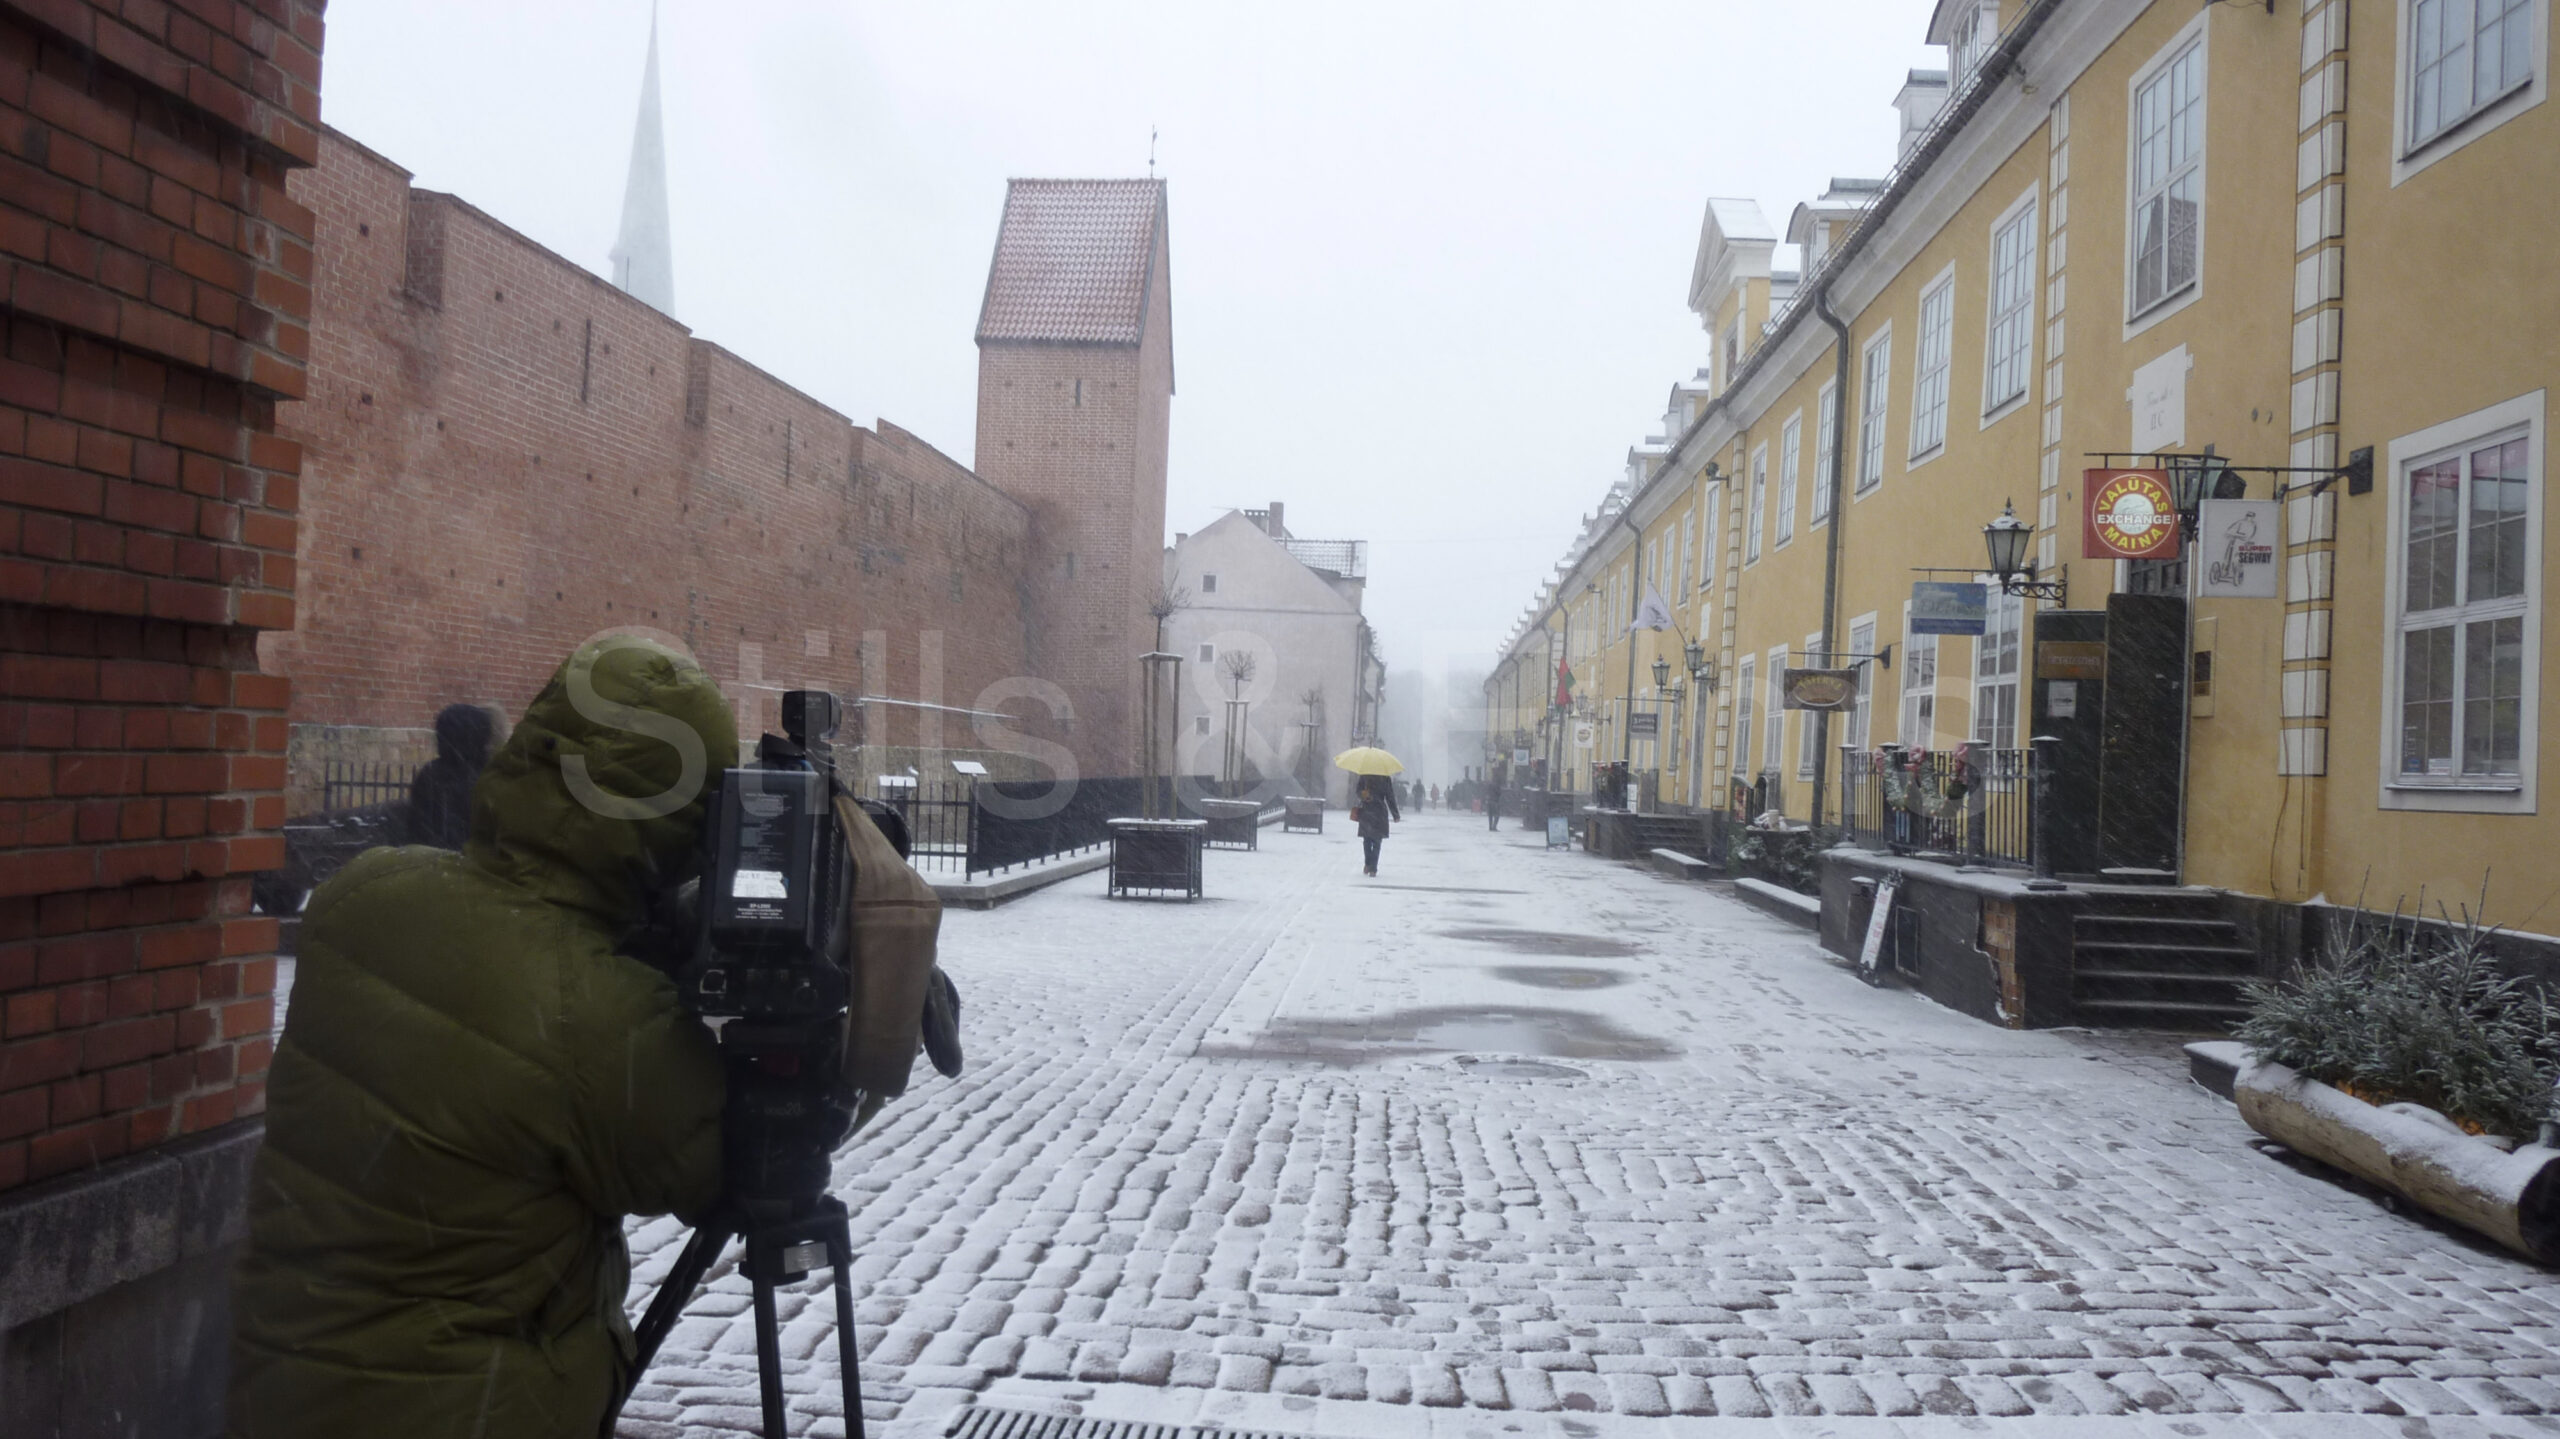 Our camera crew in Riga filmed for the UEFA in a Multi-Location Video Production project